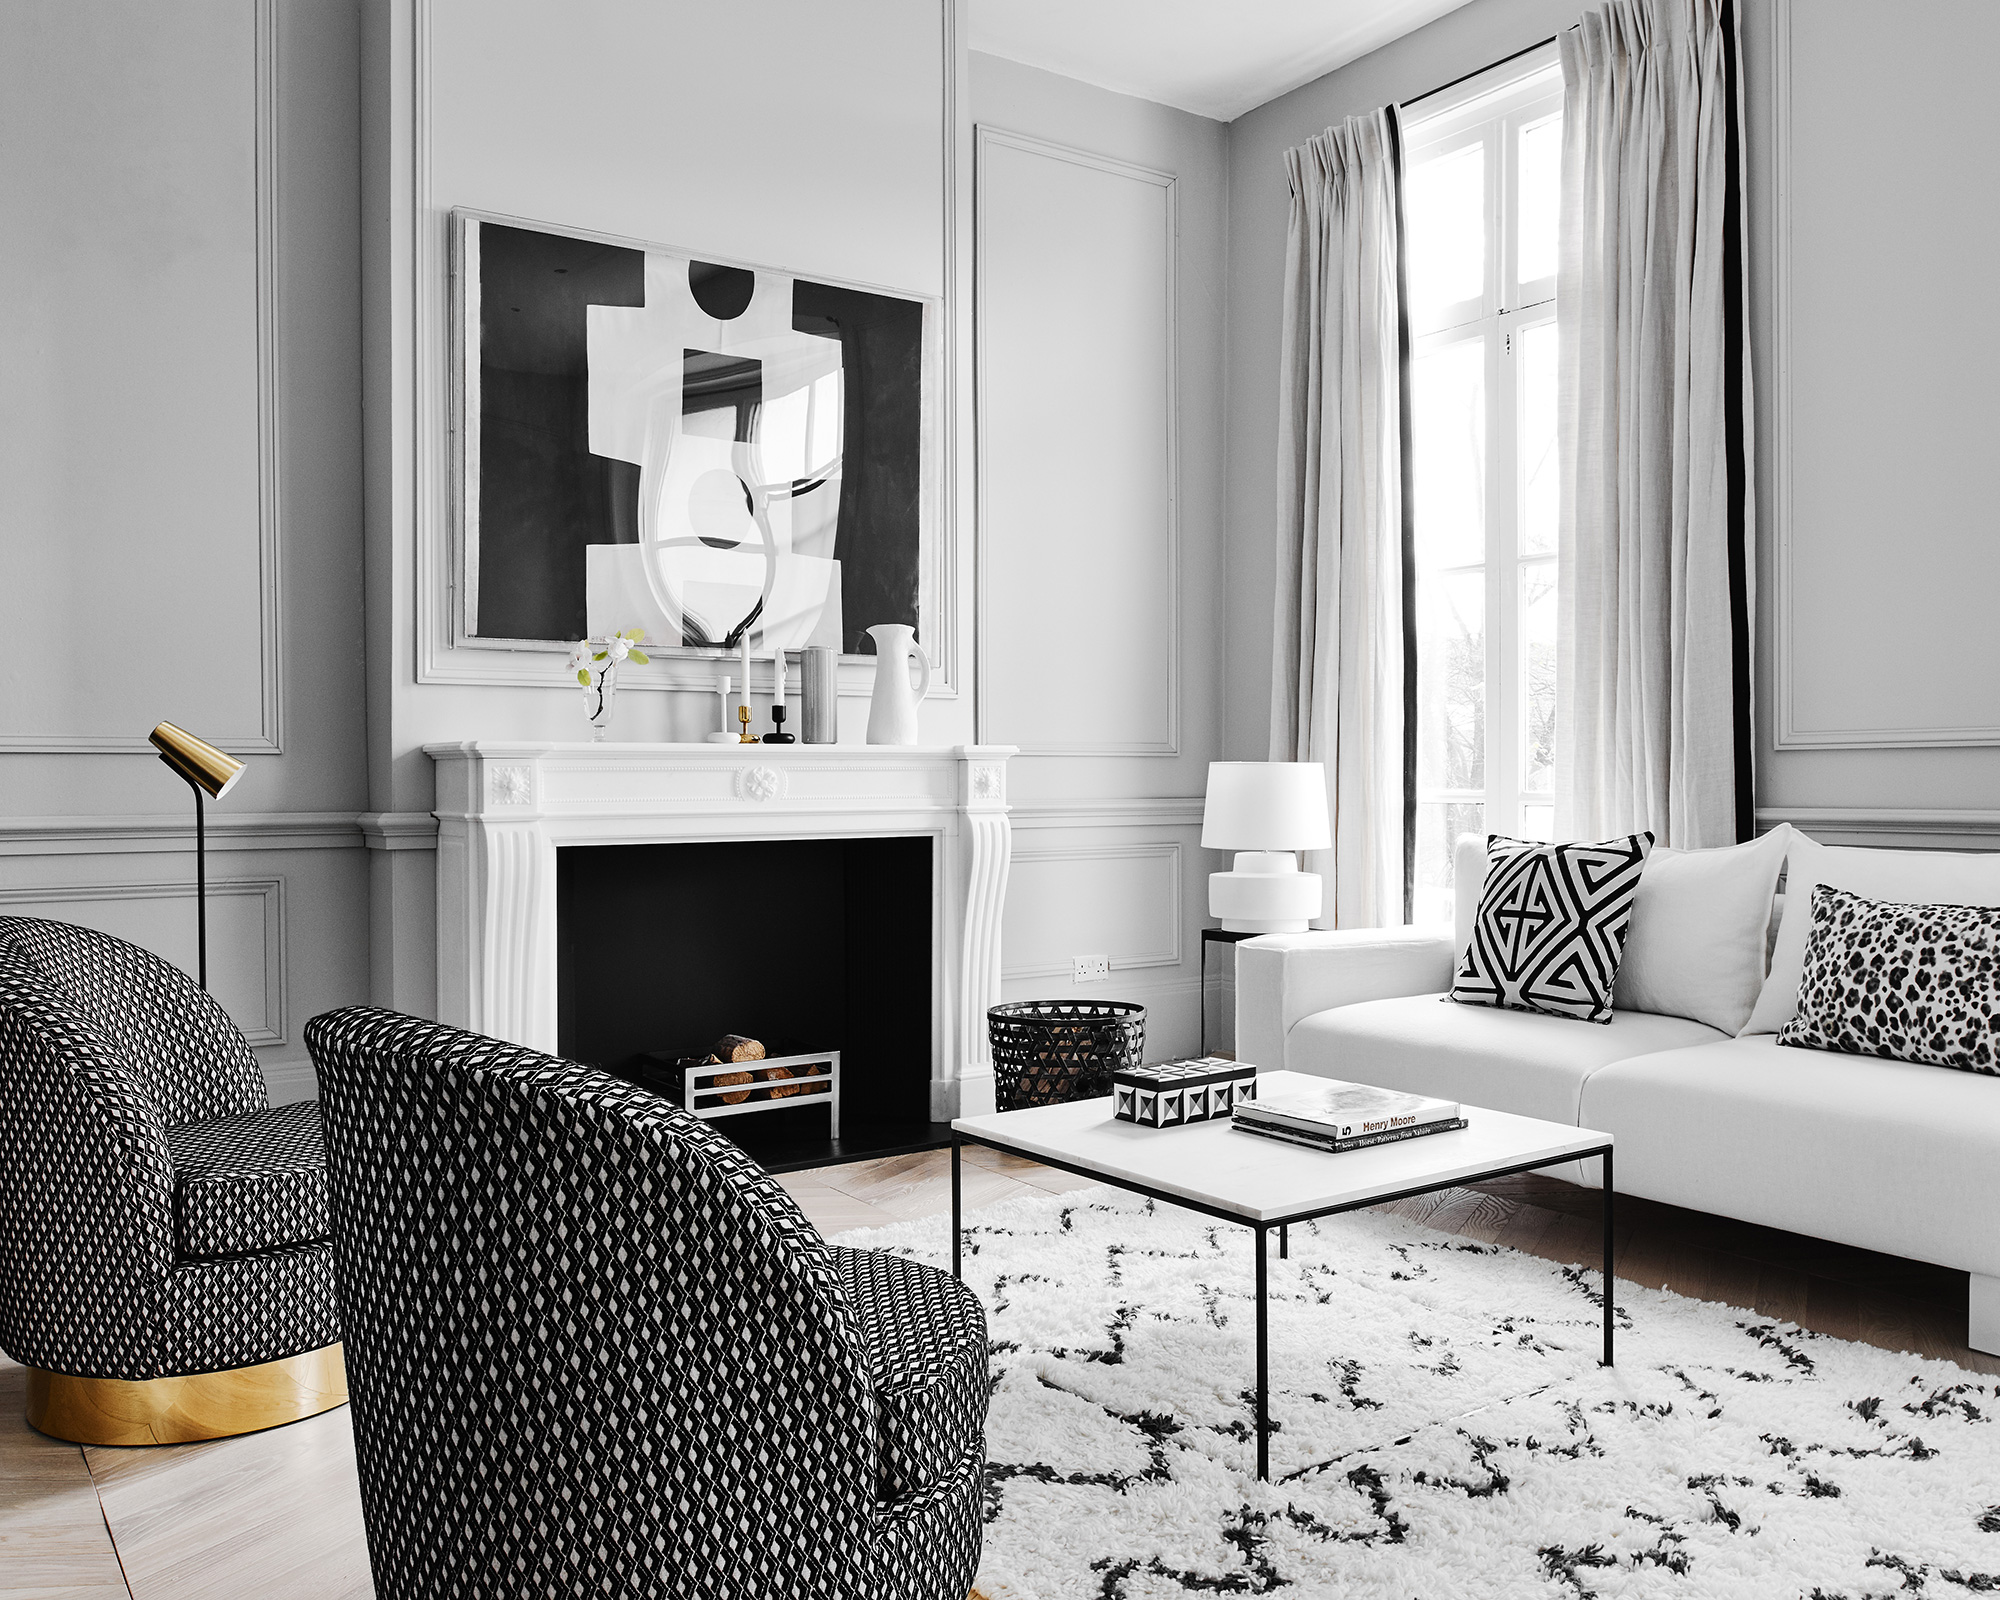 Pale grey living room ideas with black and white details in the furniture, rug and artwork.